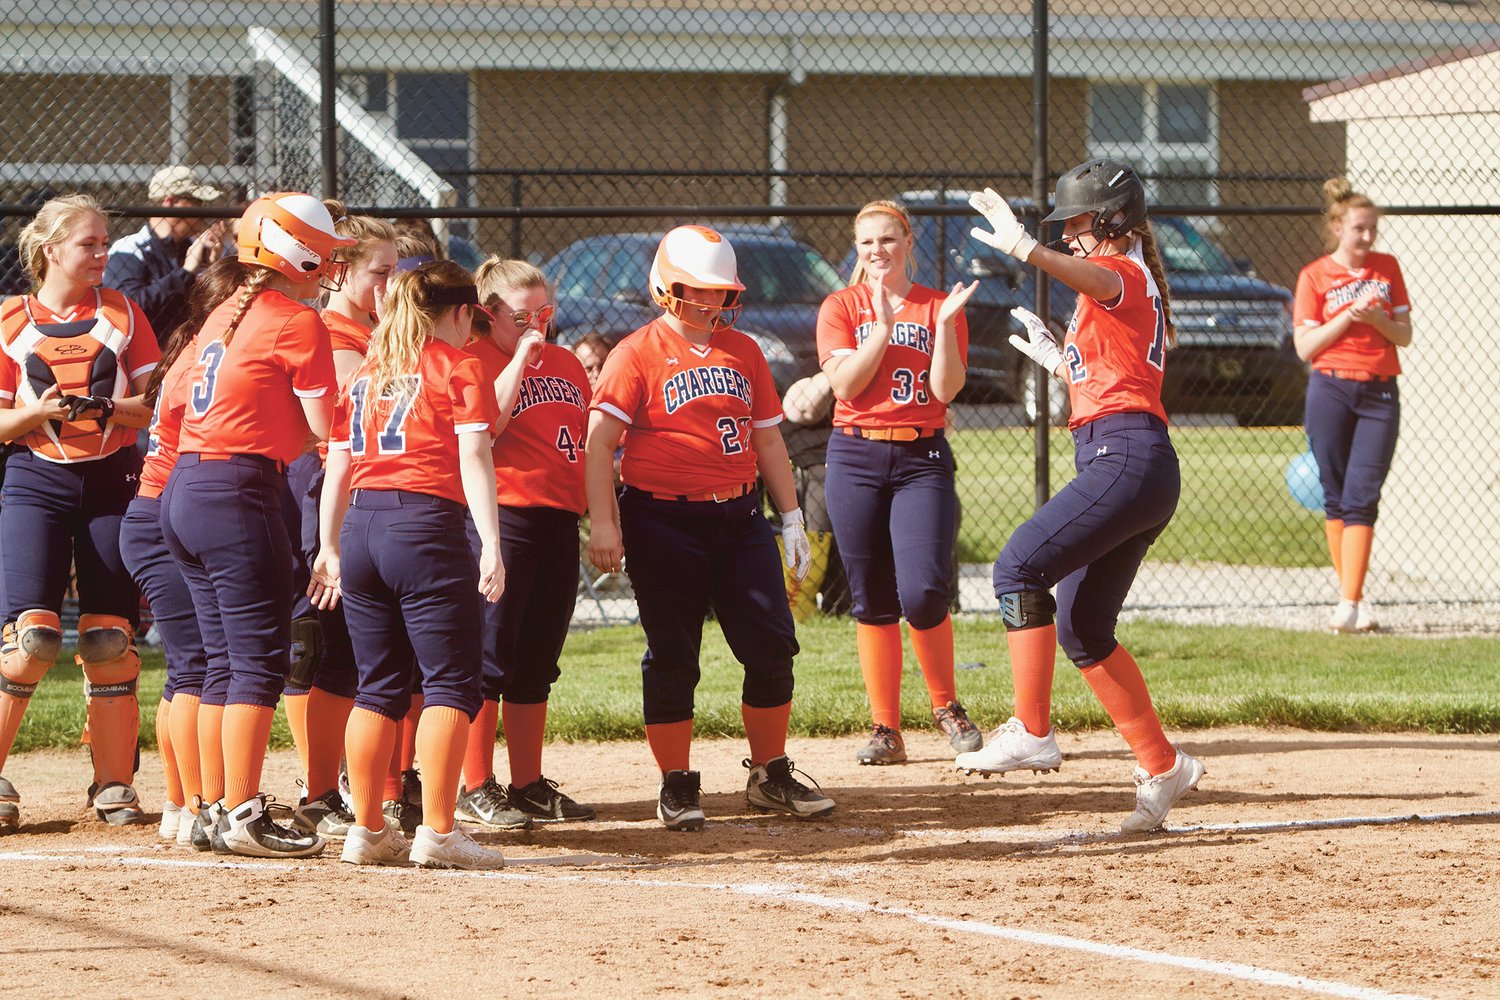 The Chargers celebrate after a Makinze Rominger's home run.